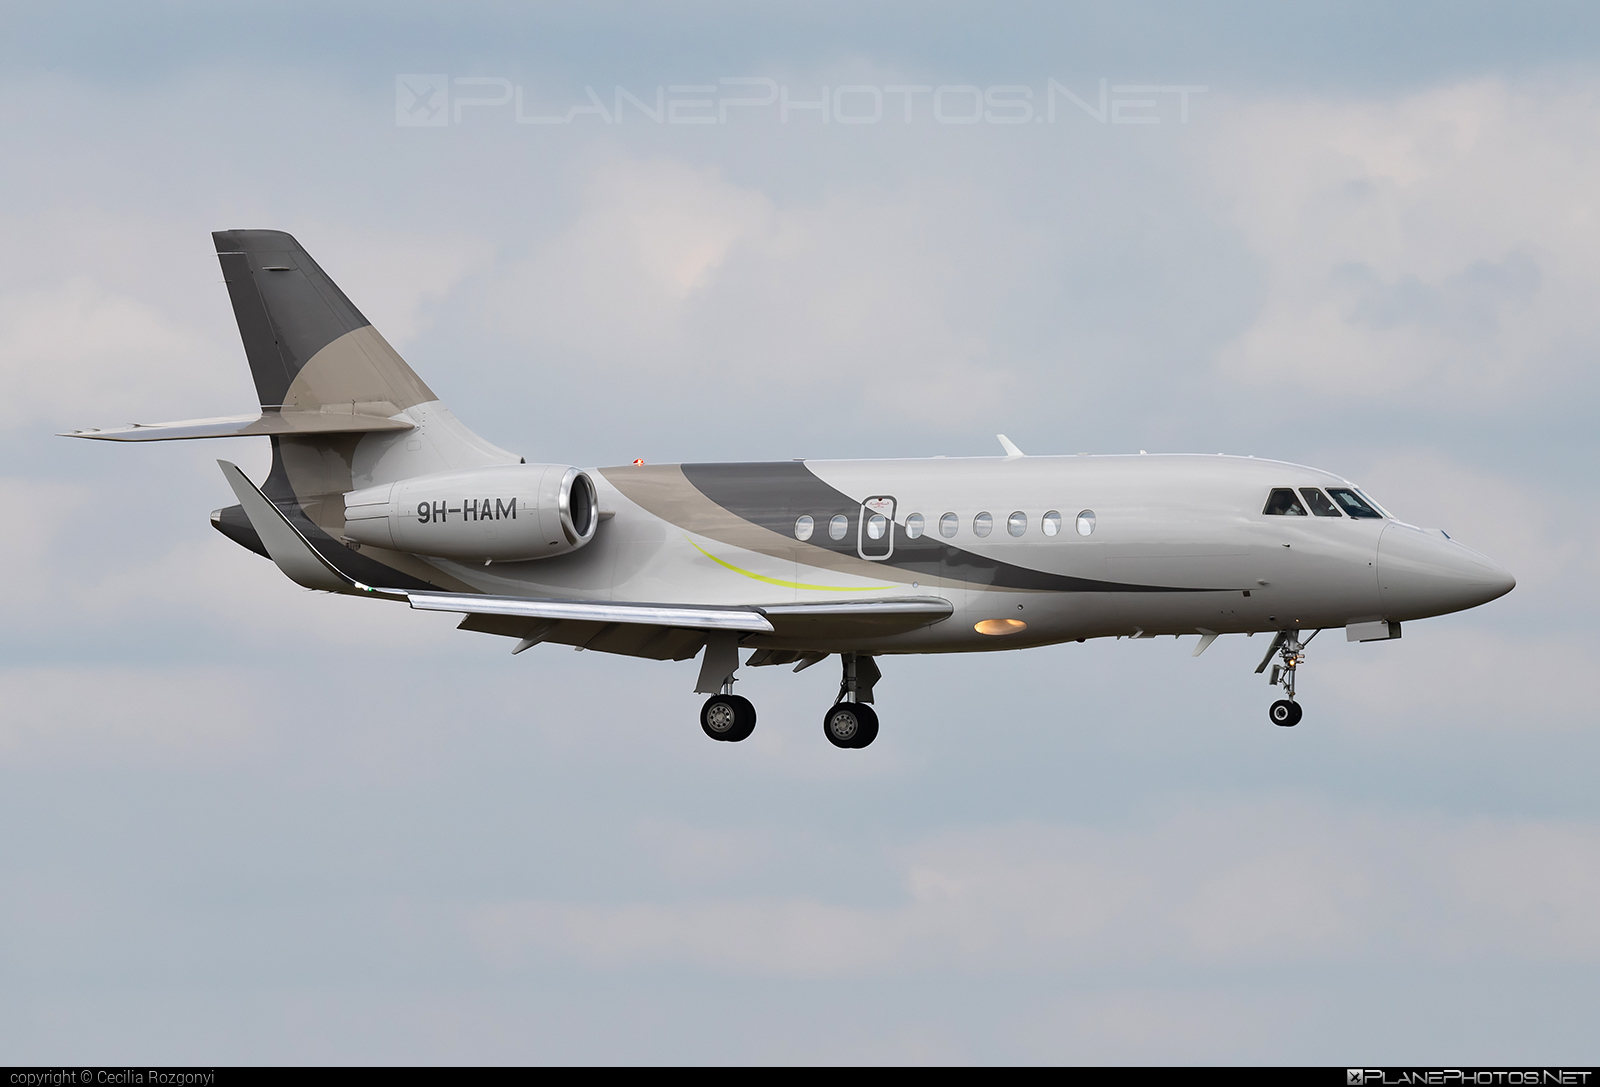 Dassault Falcon 2000LX - 9H-HAM operated by Avcon Jet Malta #avconjet #avconjetmalta #dassault #dassaultfalcon #dassaultfalcon2000 #dassaultfalcon2000lx #falcon2000 #falcon2000lx